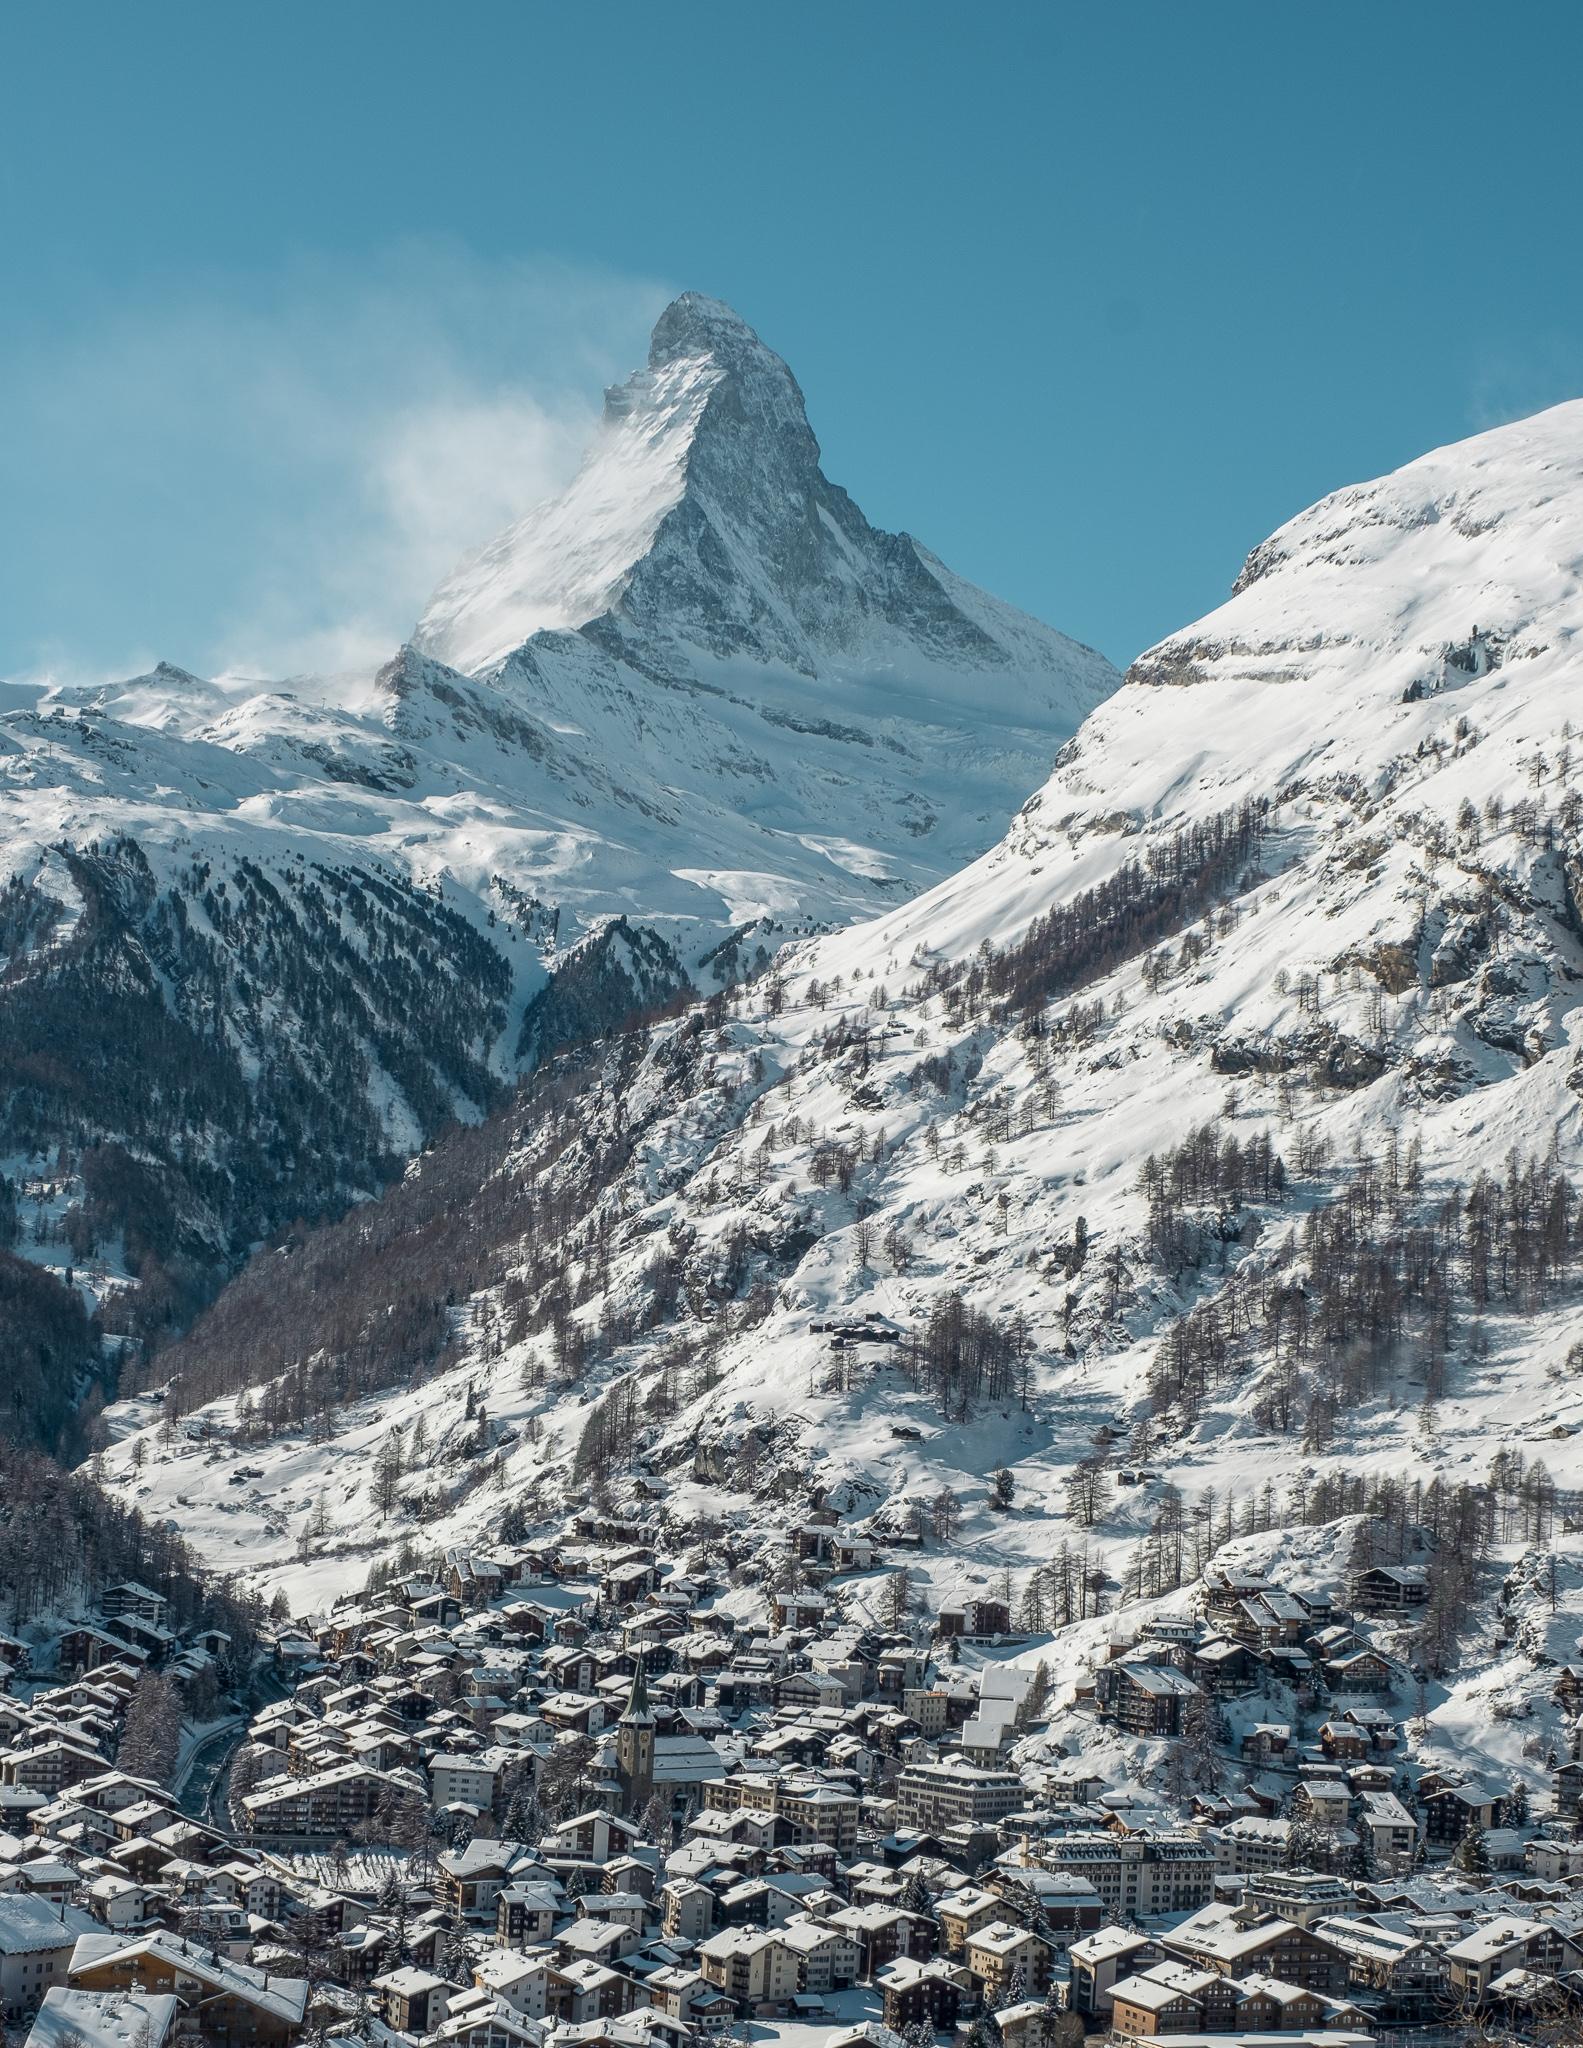 Matterhorn mountain on a clear, cloudless, sunny day with Zermatt village below and snow everywhere